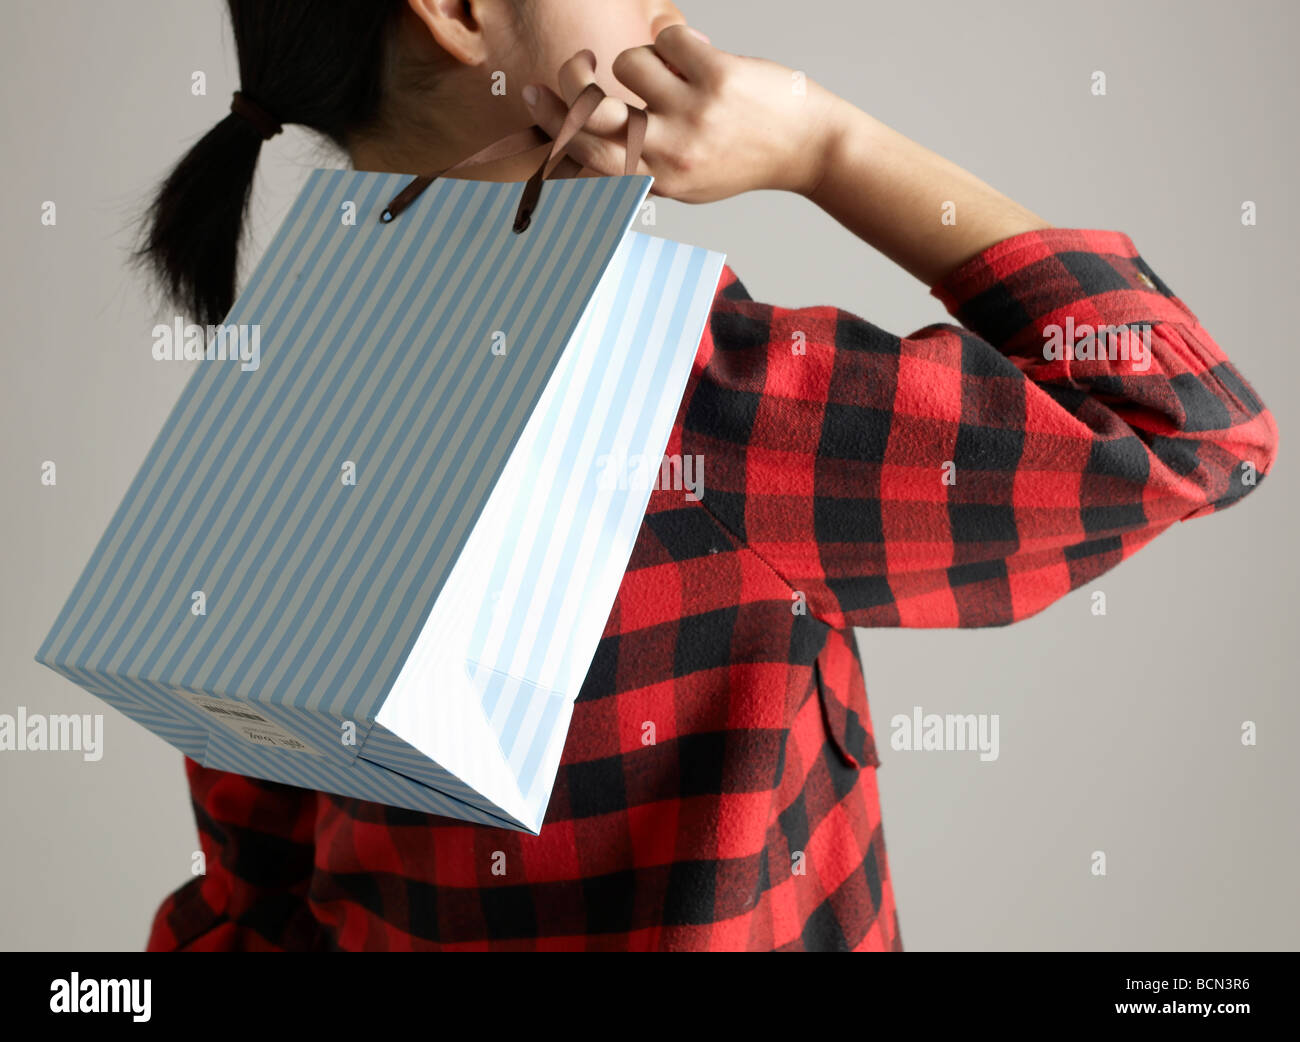 Woman Carrying Shopping Bag on Shoulder Stock Photo